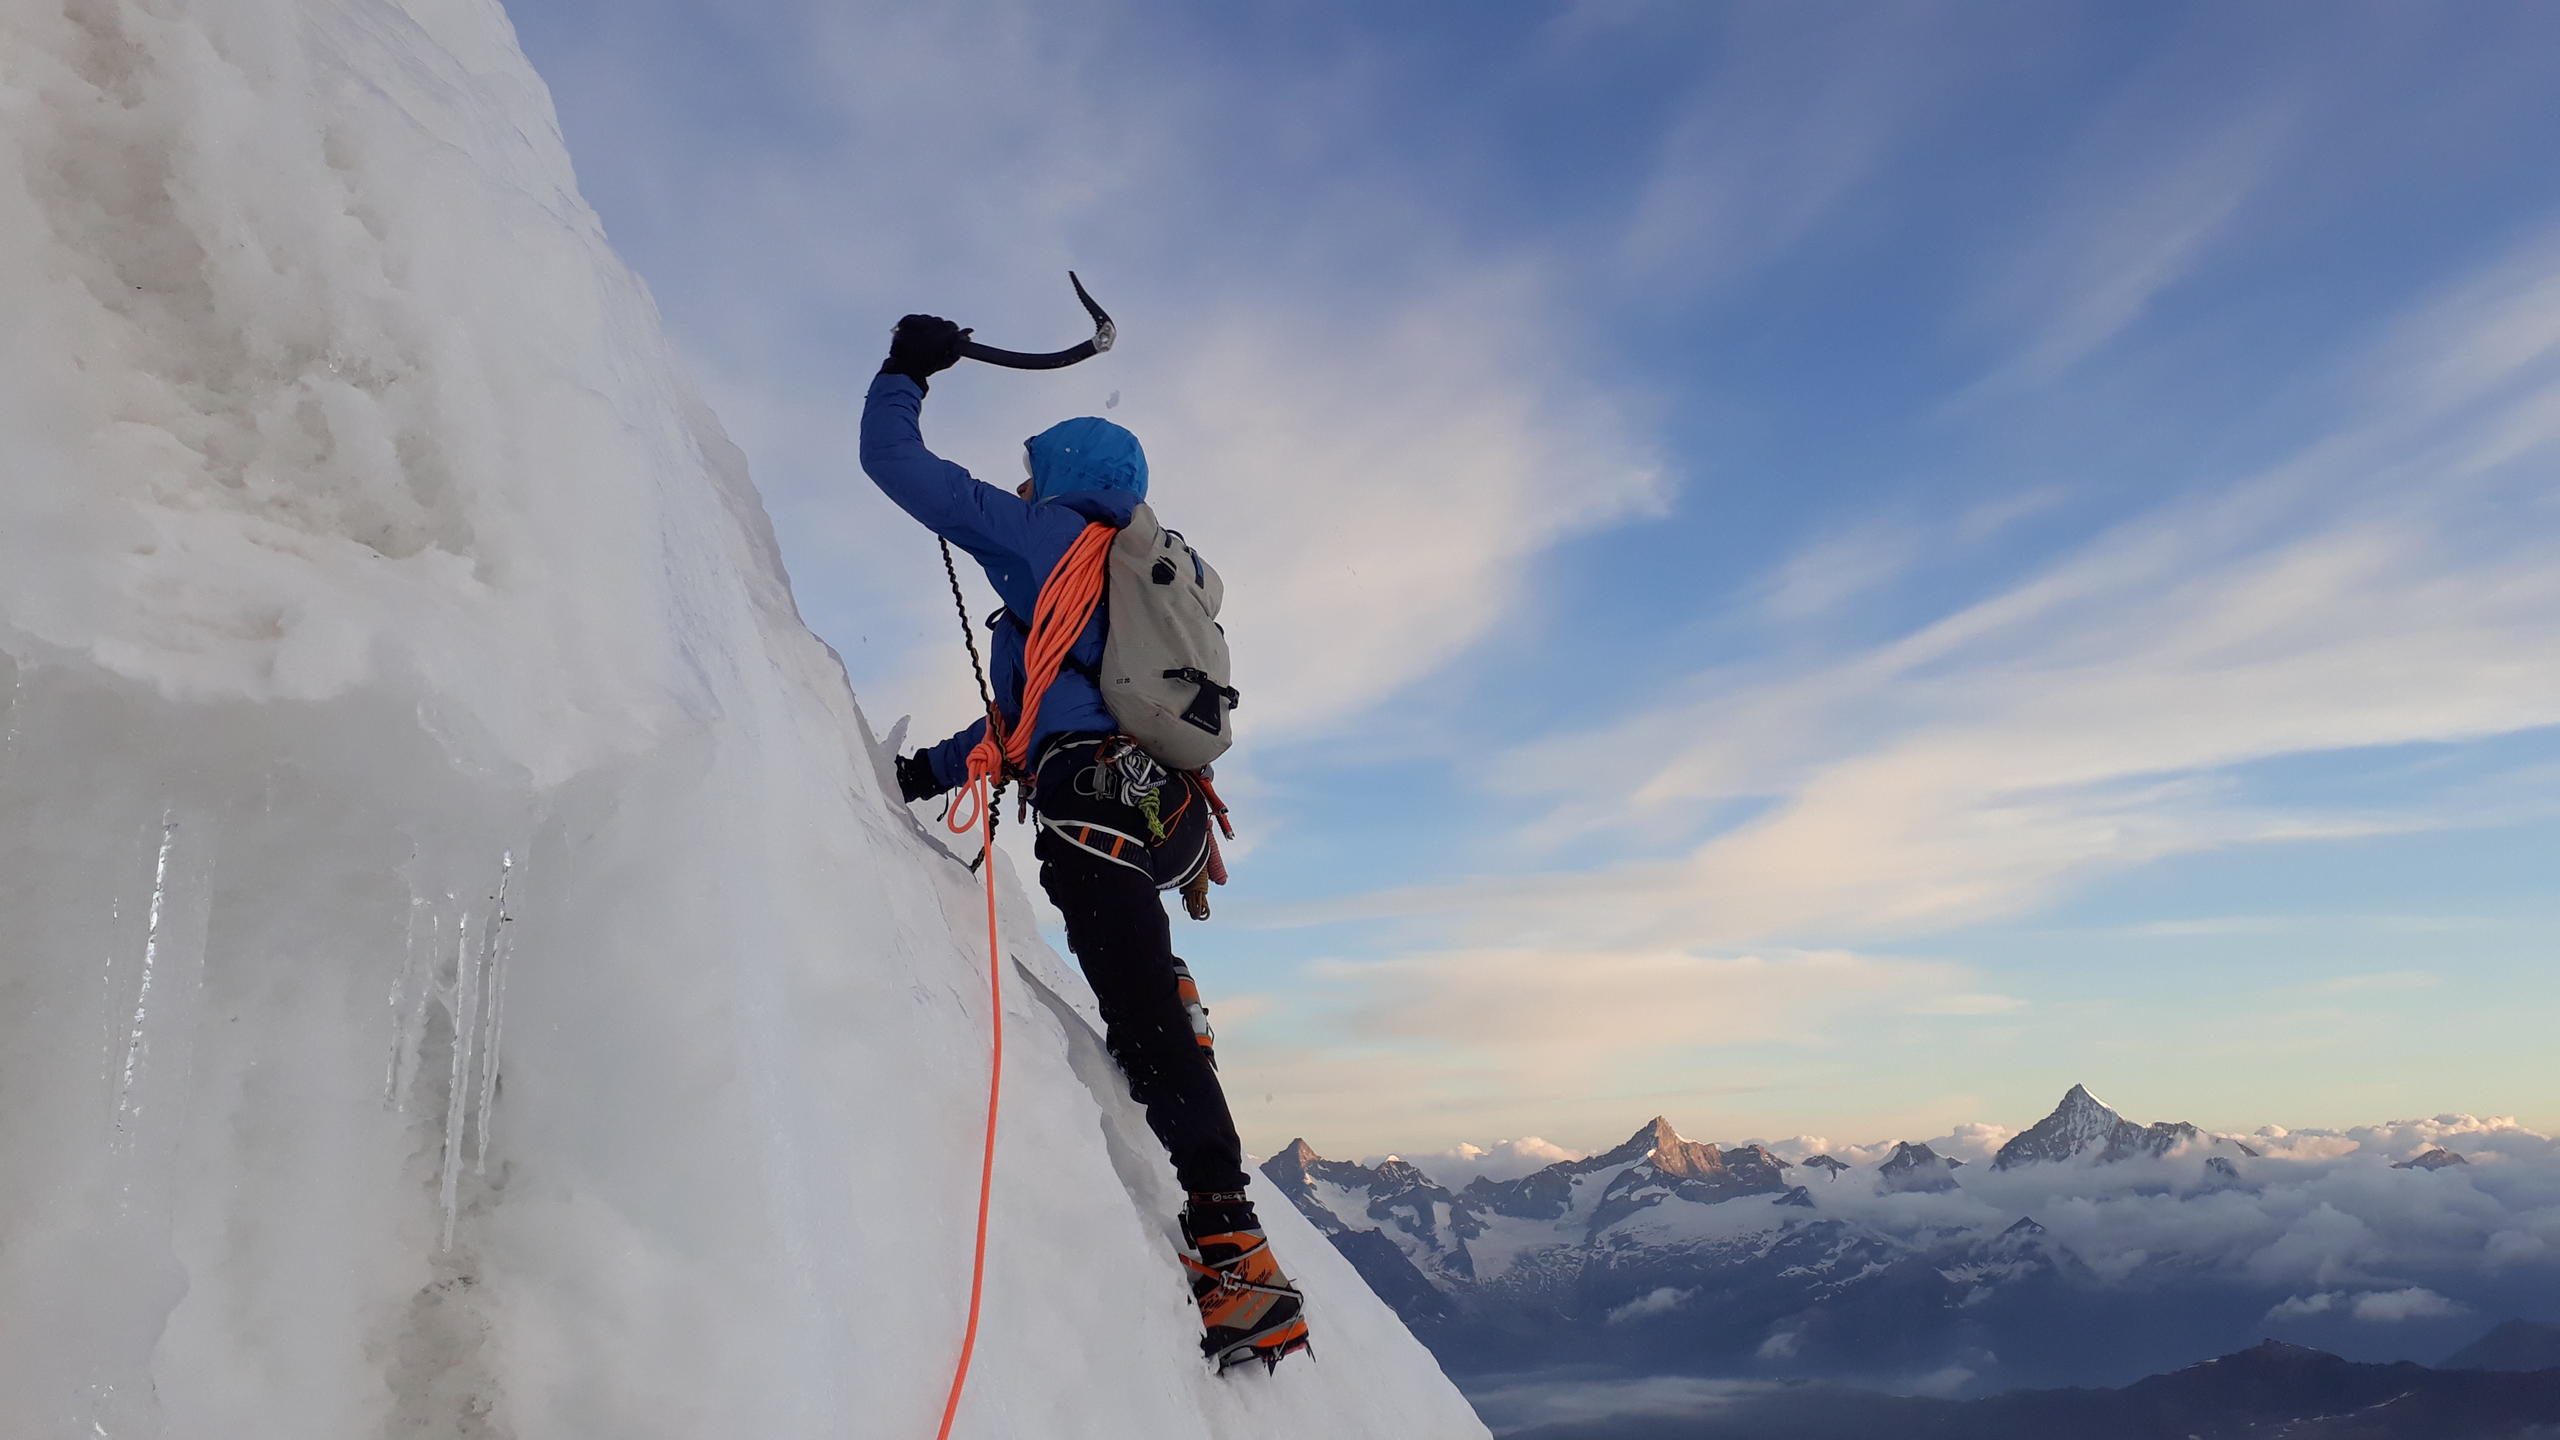 Climber on a mountain wall, attached to rope, about to strike with an ice axe